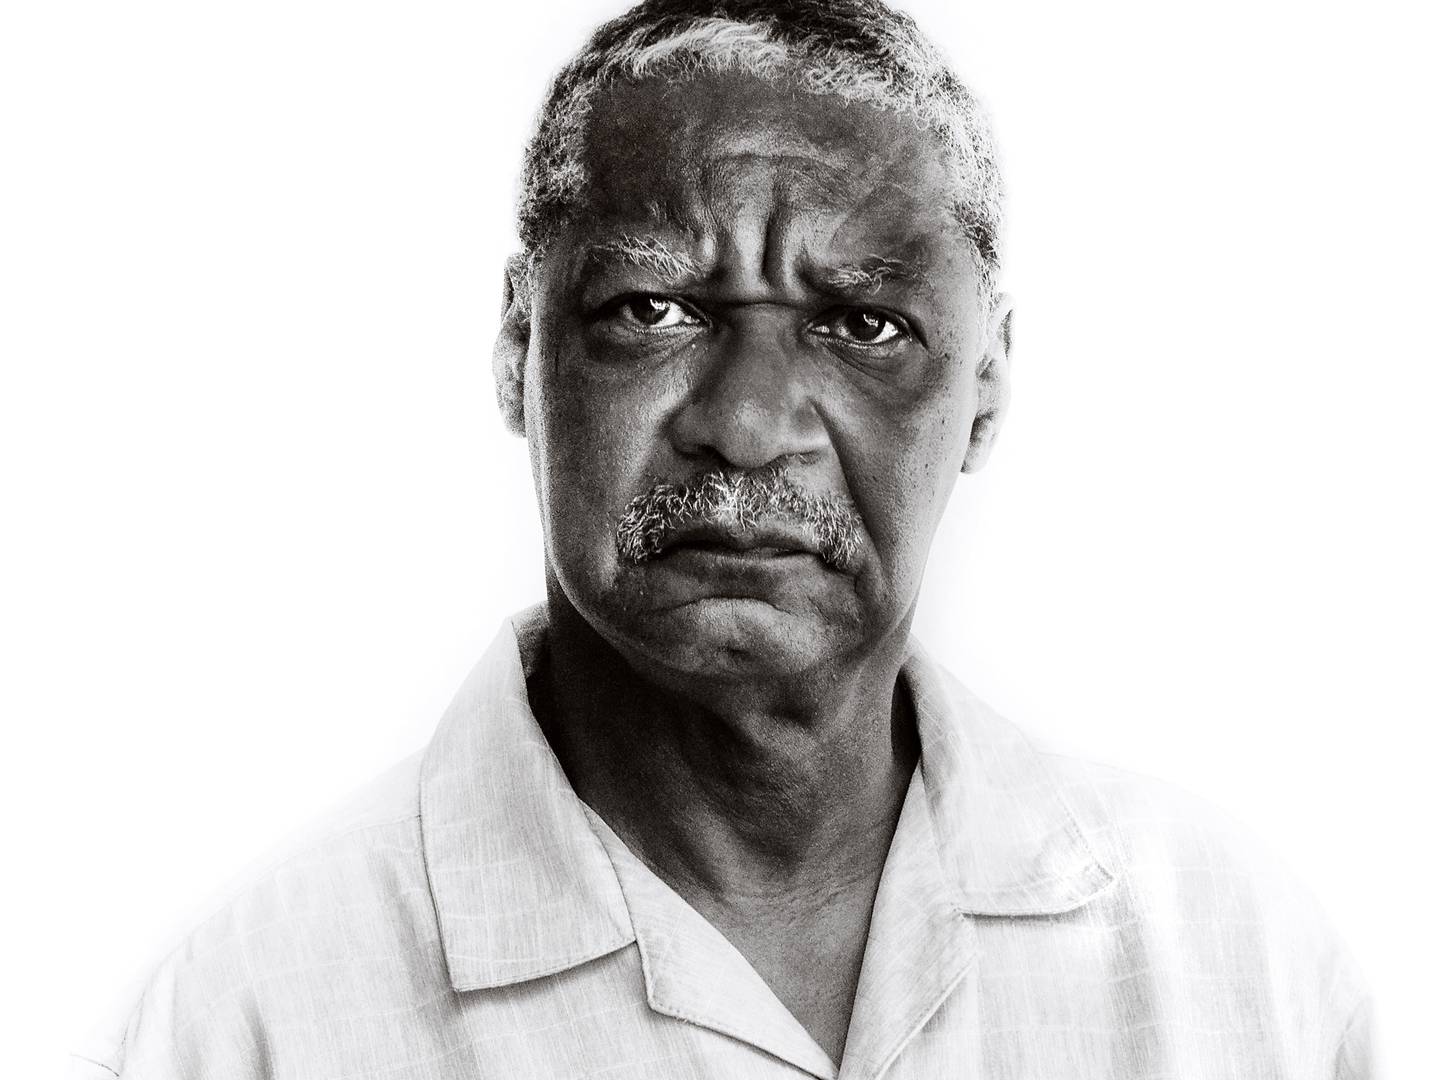 Marshall "Eddie" Conway, photographed as part of a series entitled "Struggle: Portraits of the Civil Rights and Black Power".